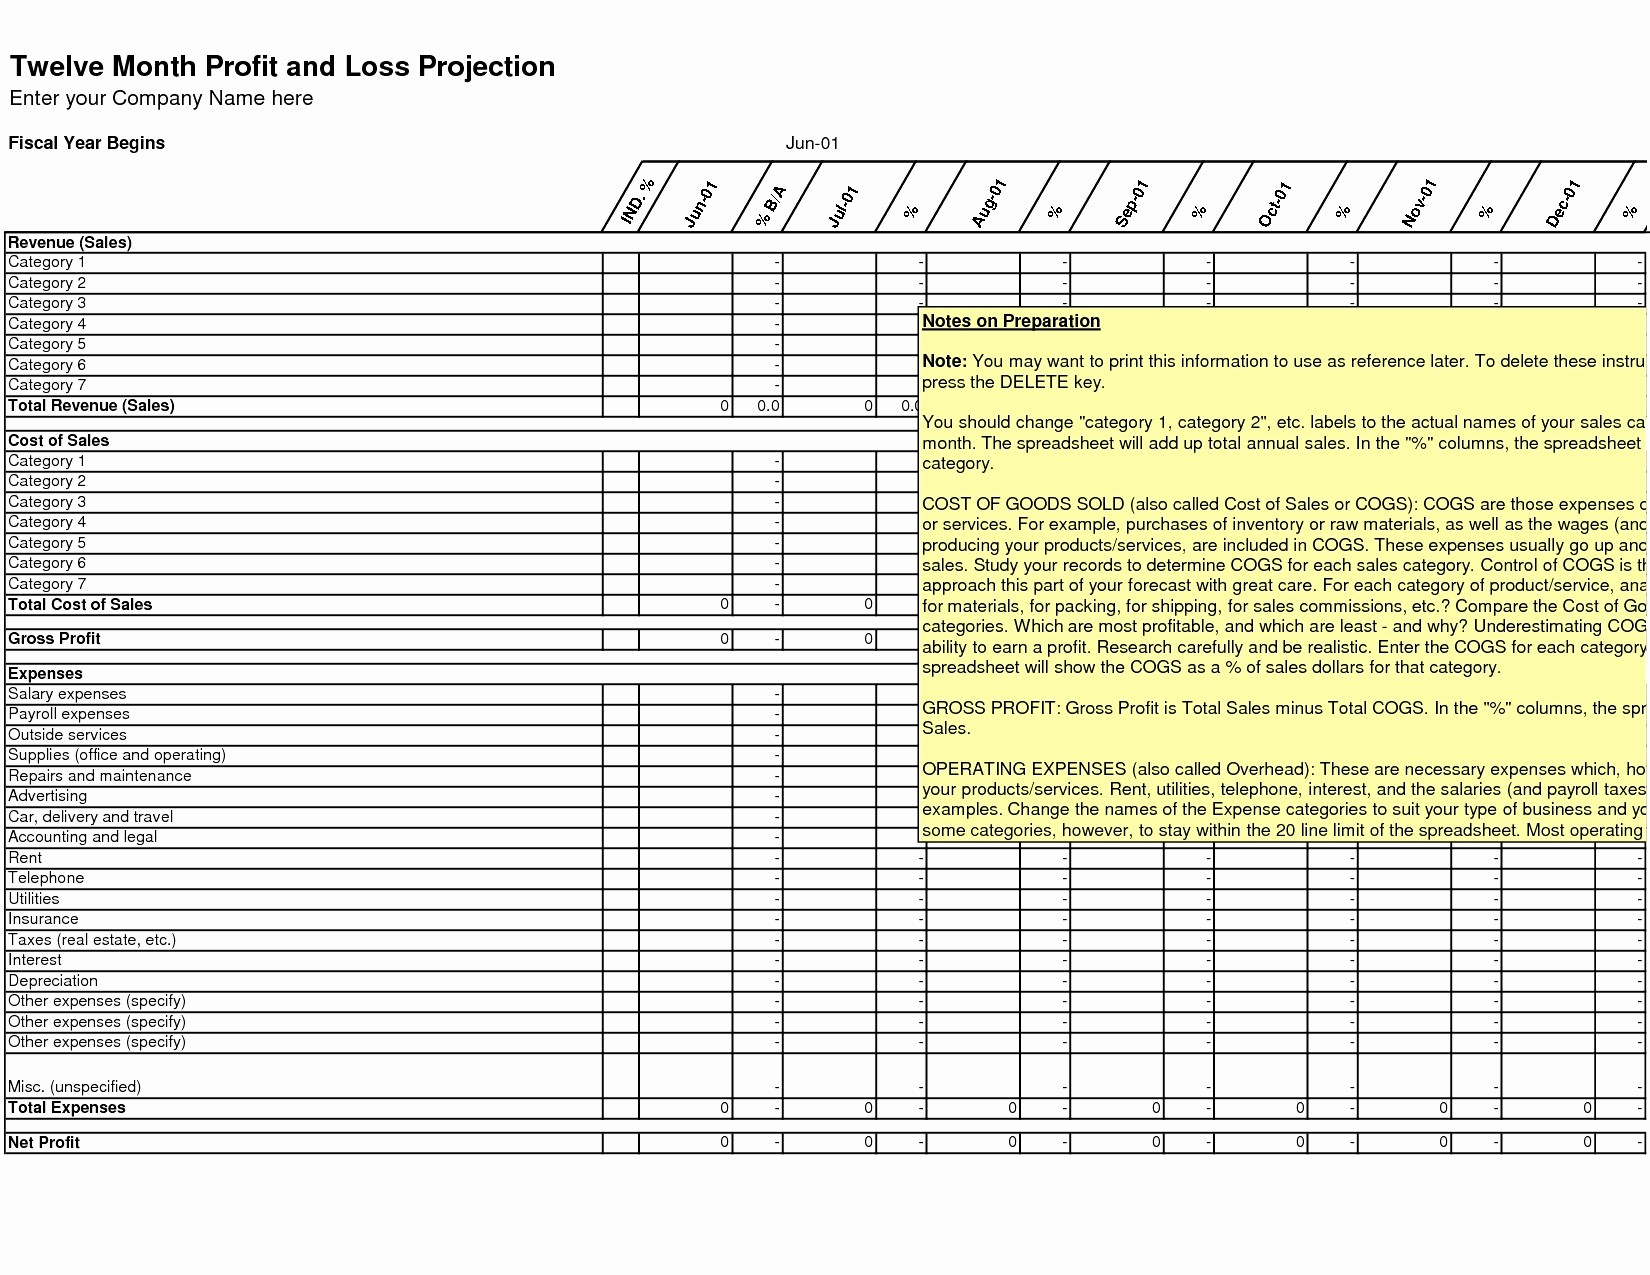 Sick Leave Accrual Spreadsheet New